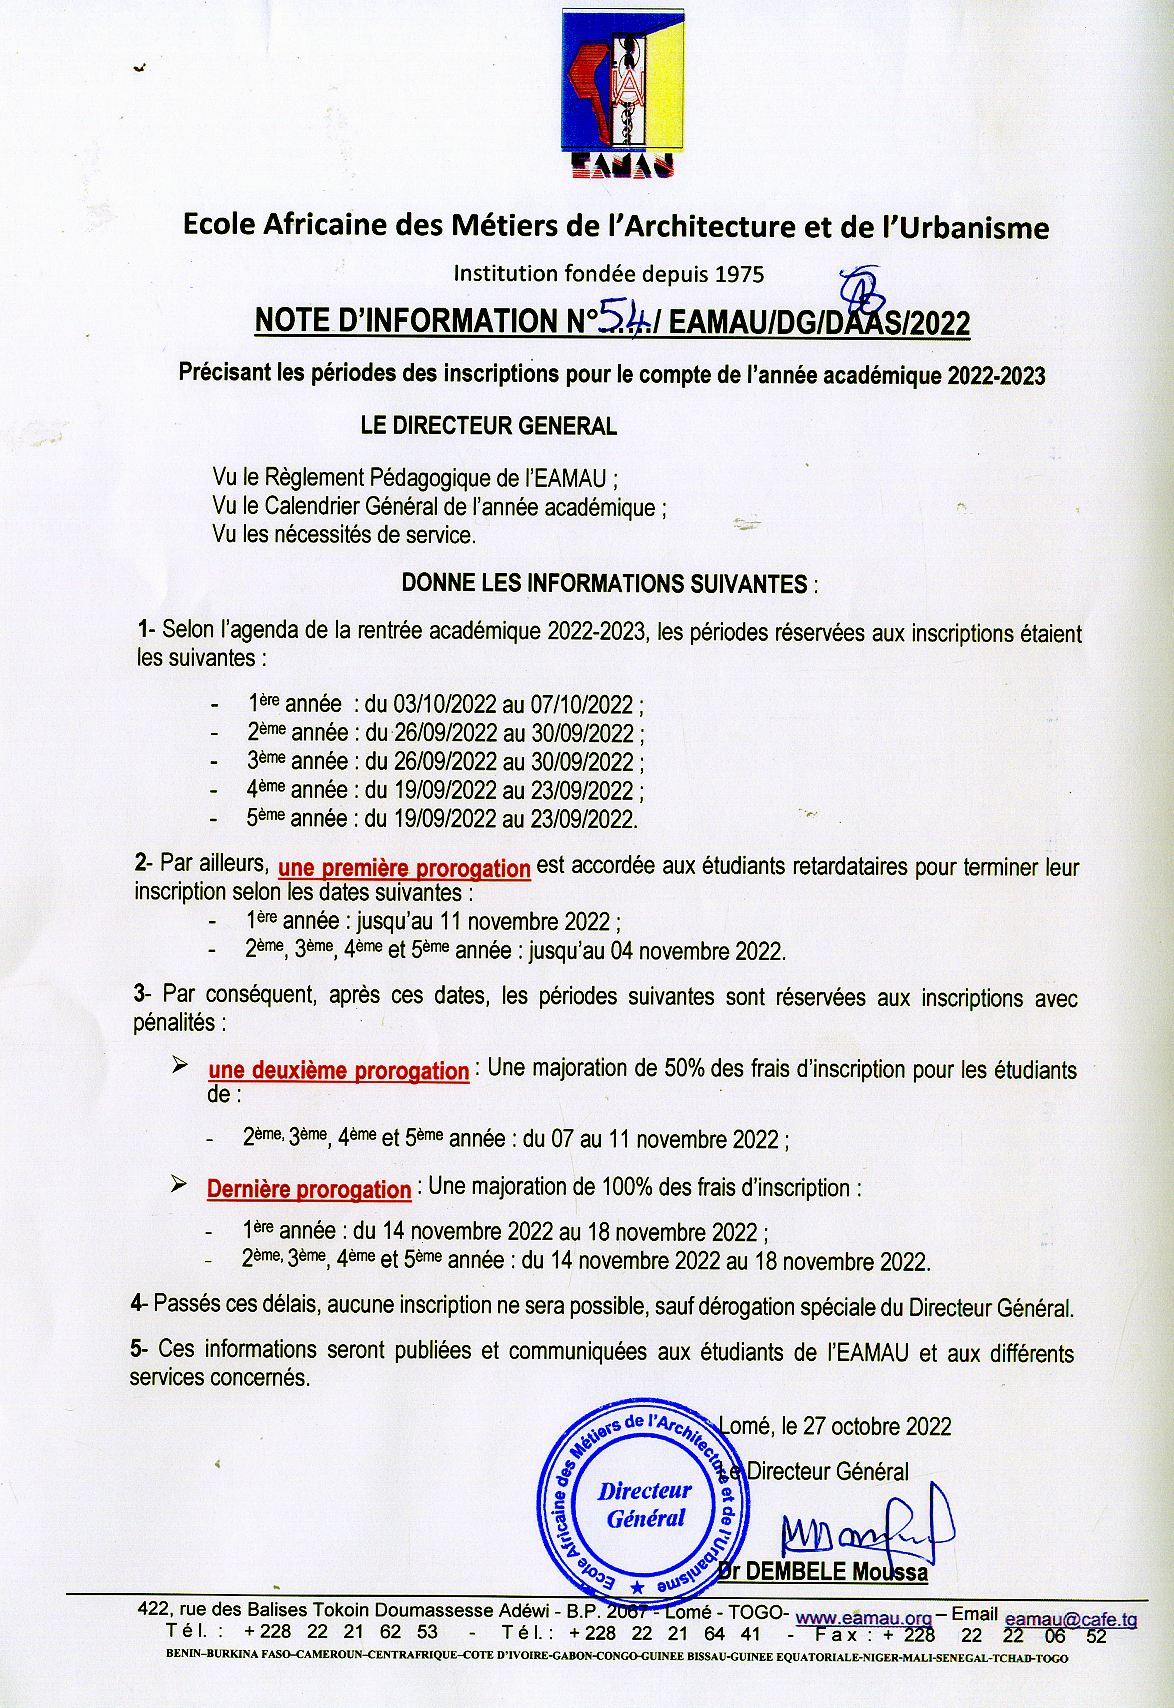 Note d’information